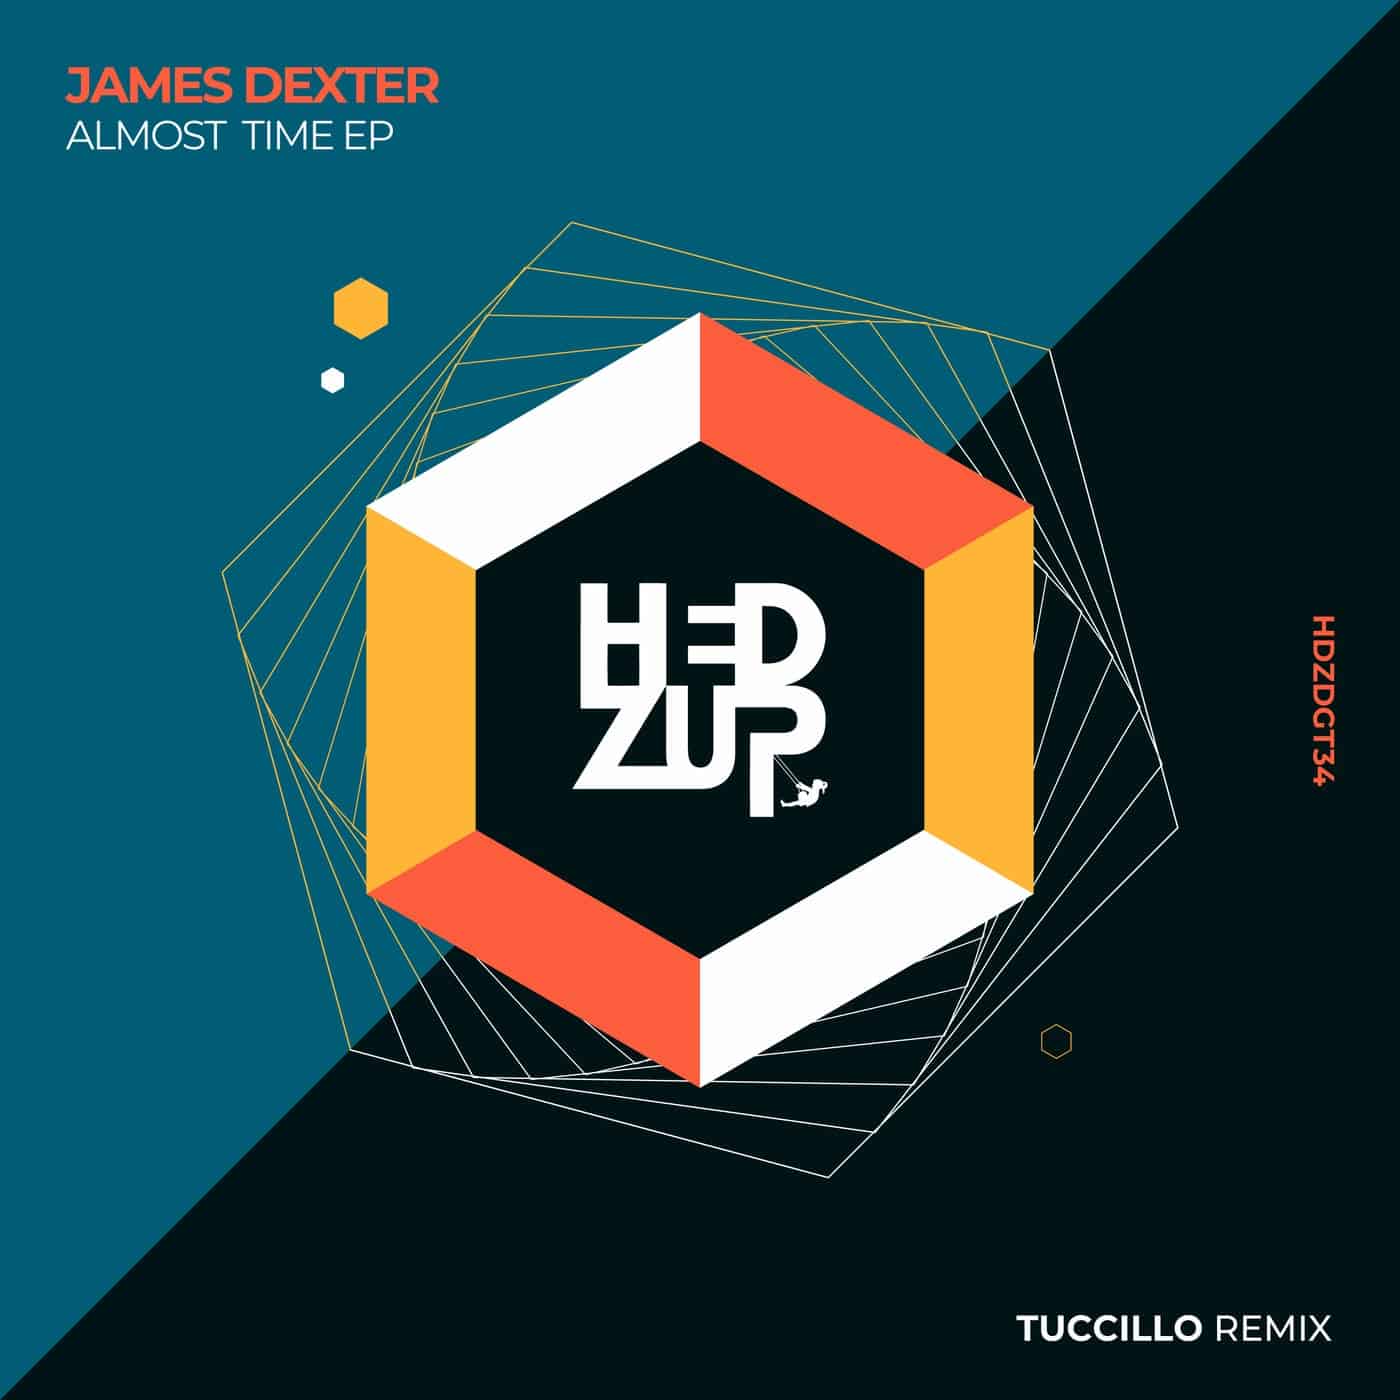 image cover: James Dexter - Almost Time EP & Tuccillo remix / HDZDGT34